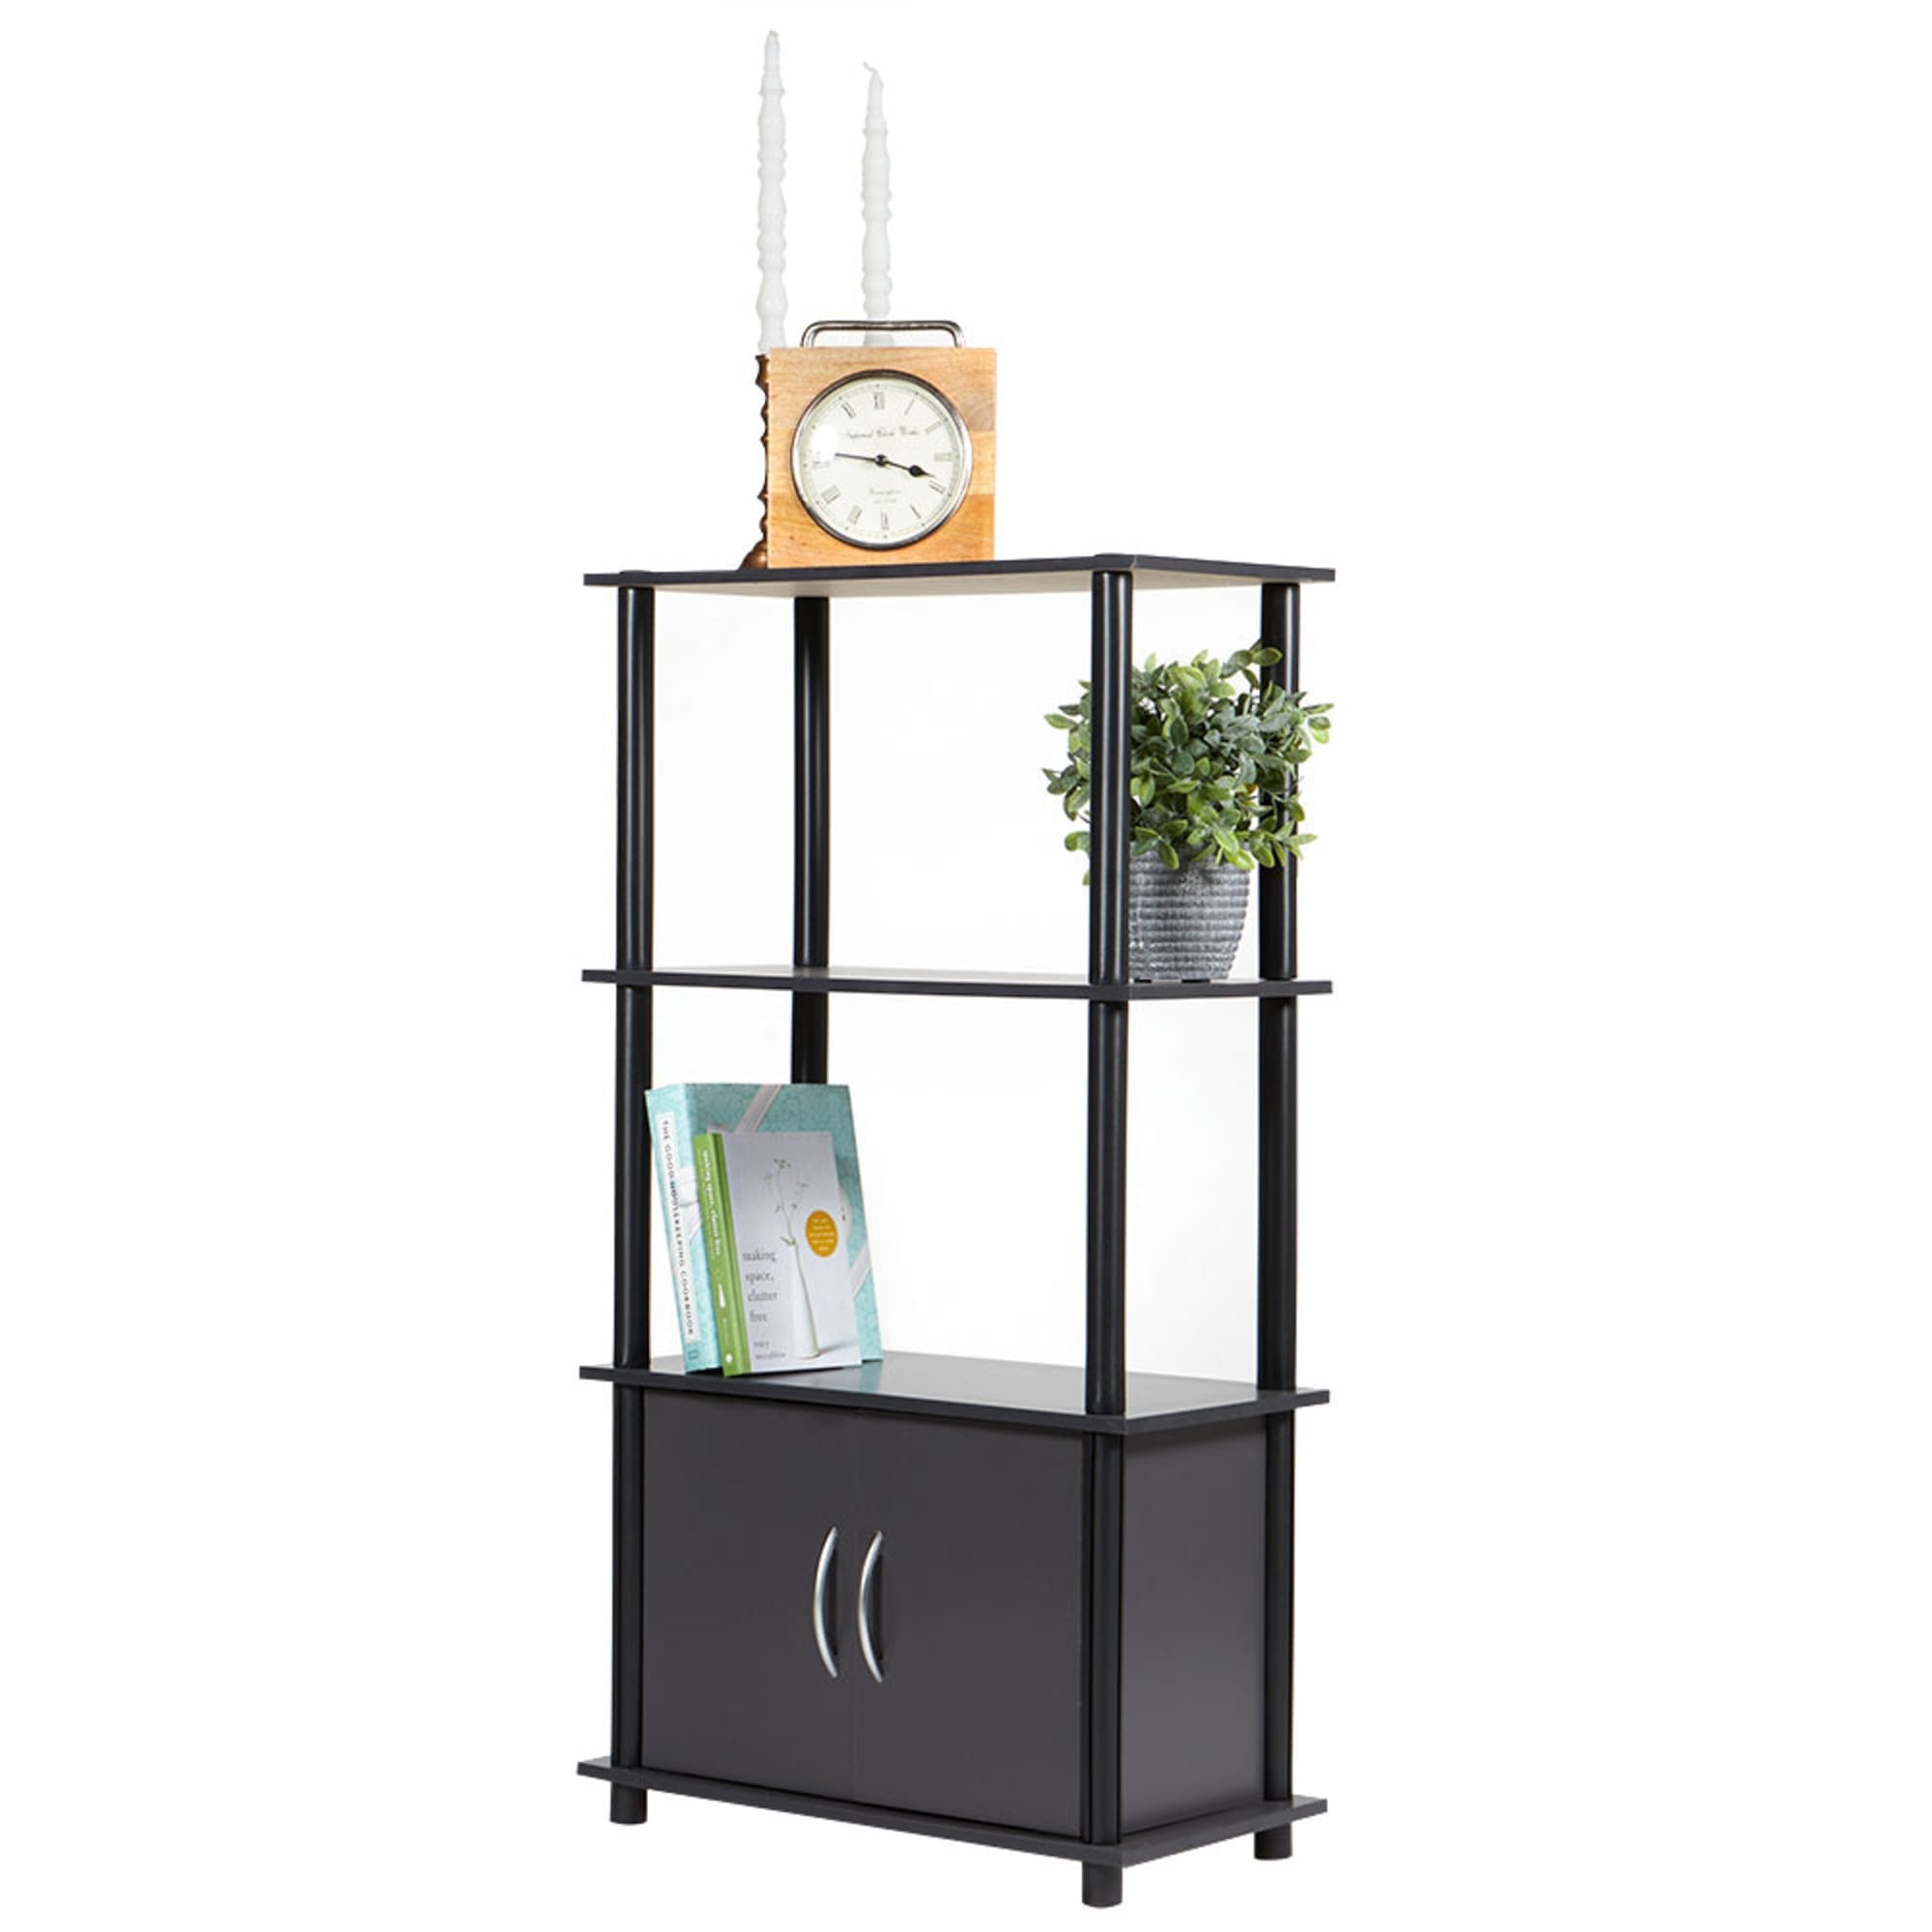 Home Basics 4 Tier Storage Shelf with Cabinet, Grey
 $40.00 EACH, CASE PACK OF 1